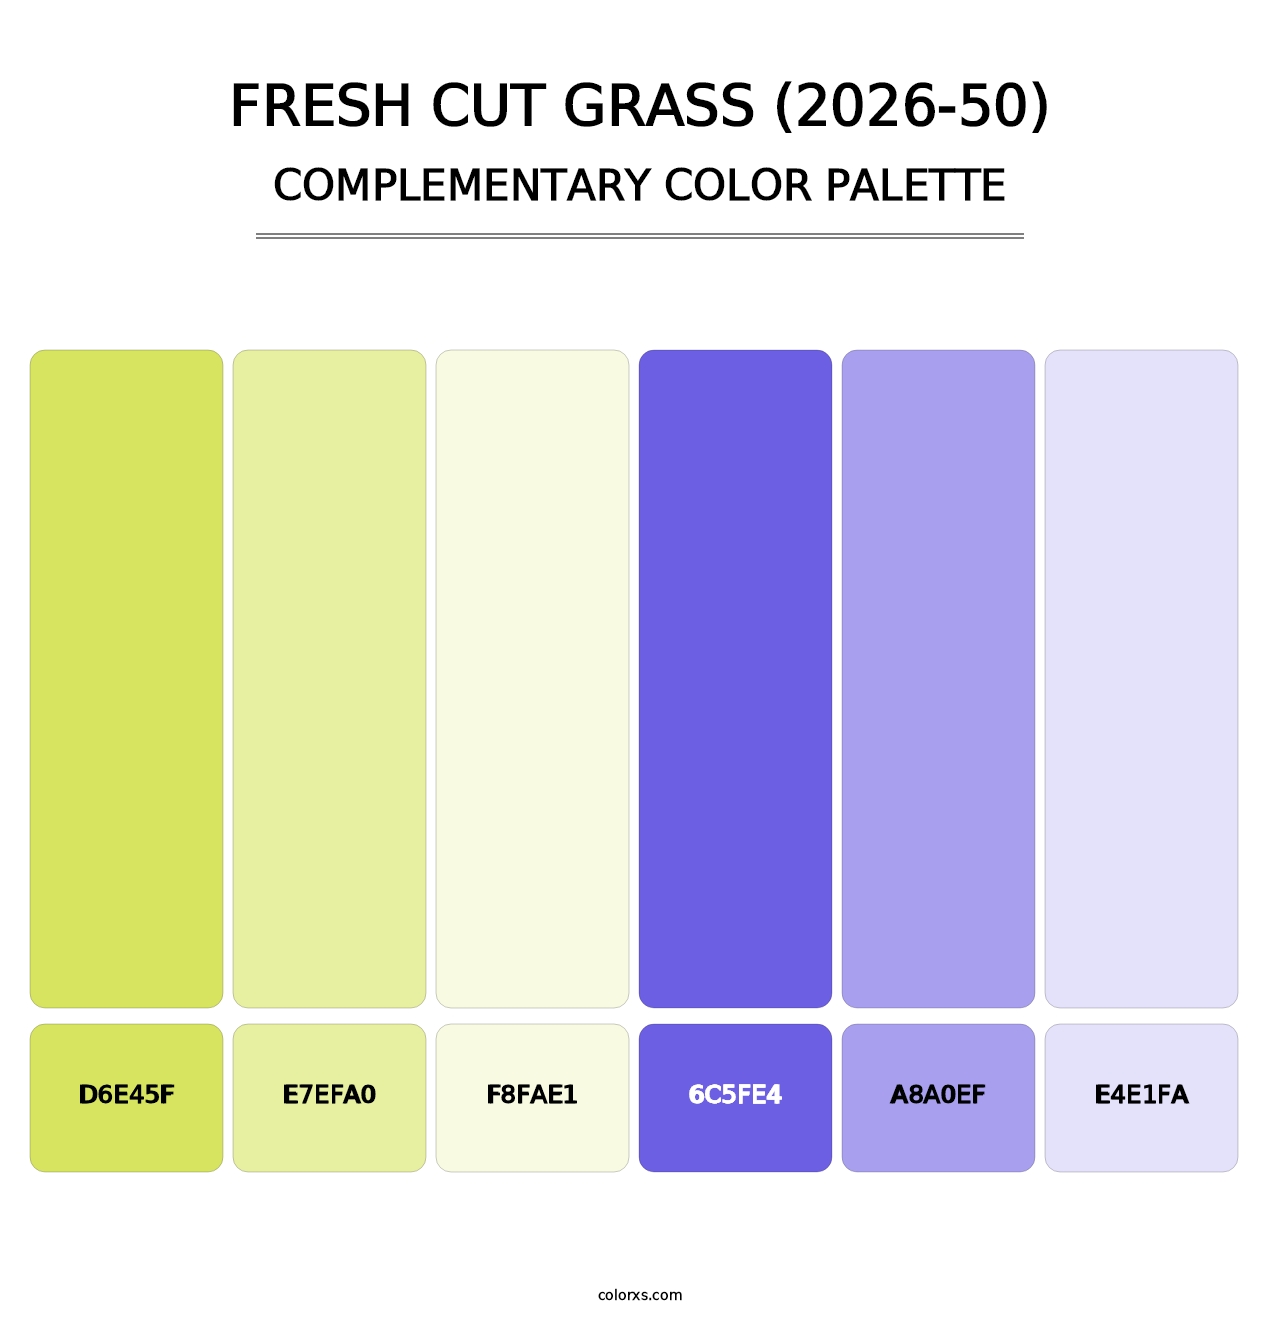 Fresh Cut Grass (2026-50) - Complementary Color Palette